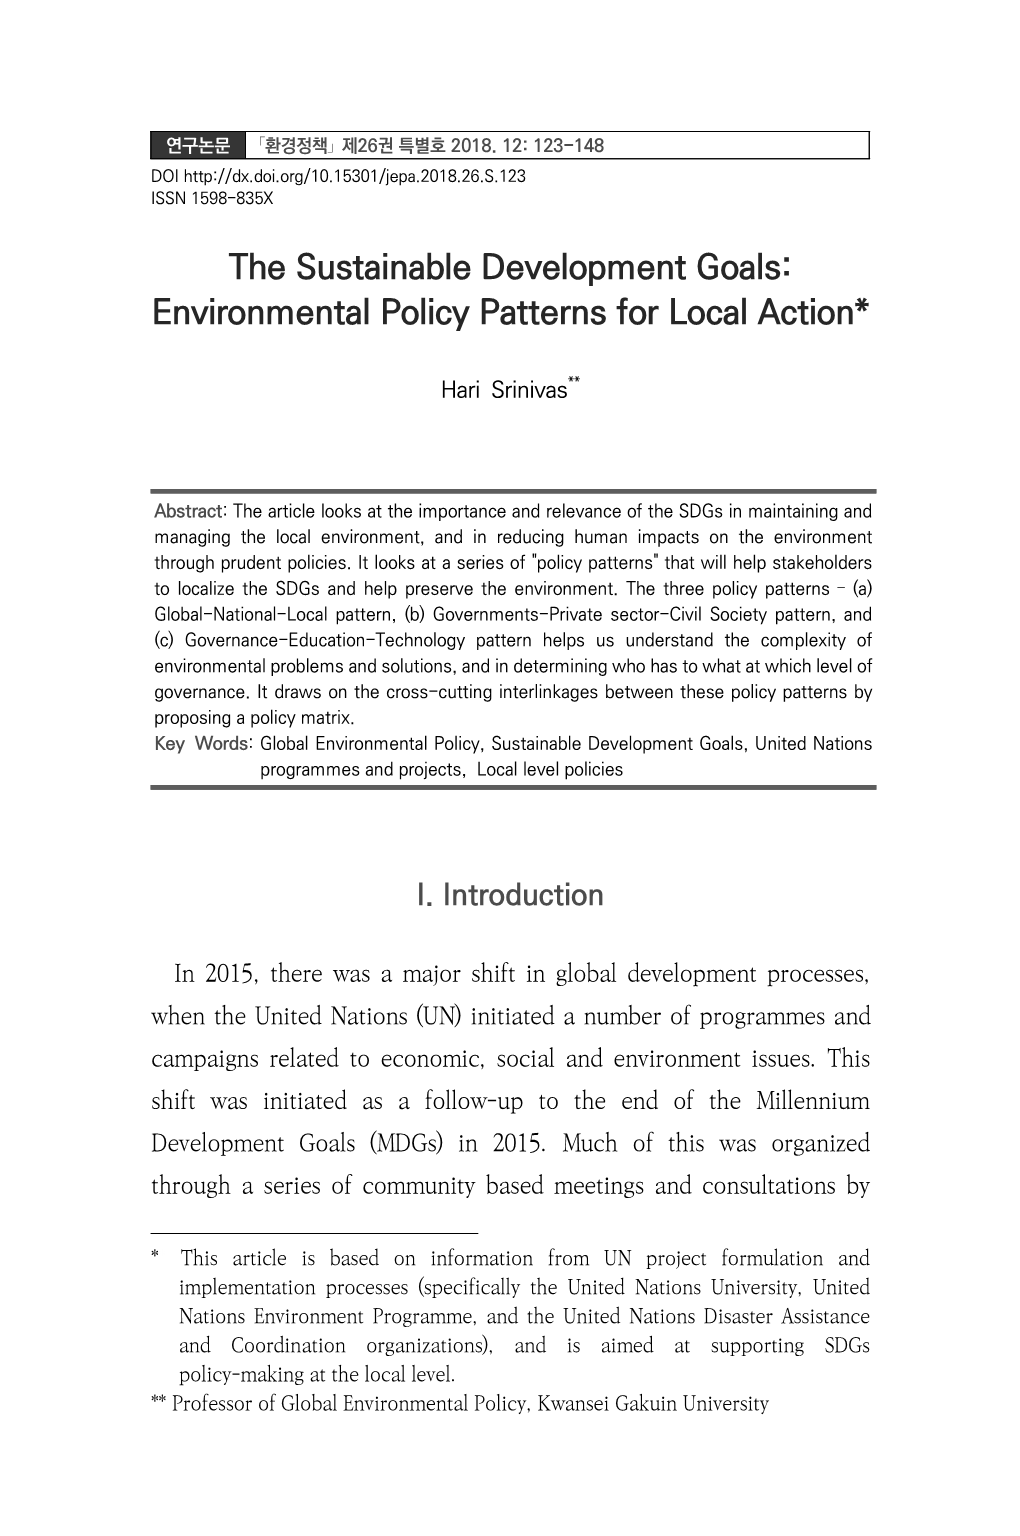 The Sustainable Development Goals: Environmental Policy Patterns for Local Action*